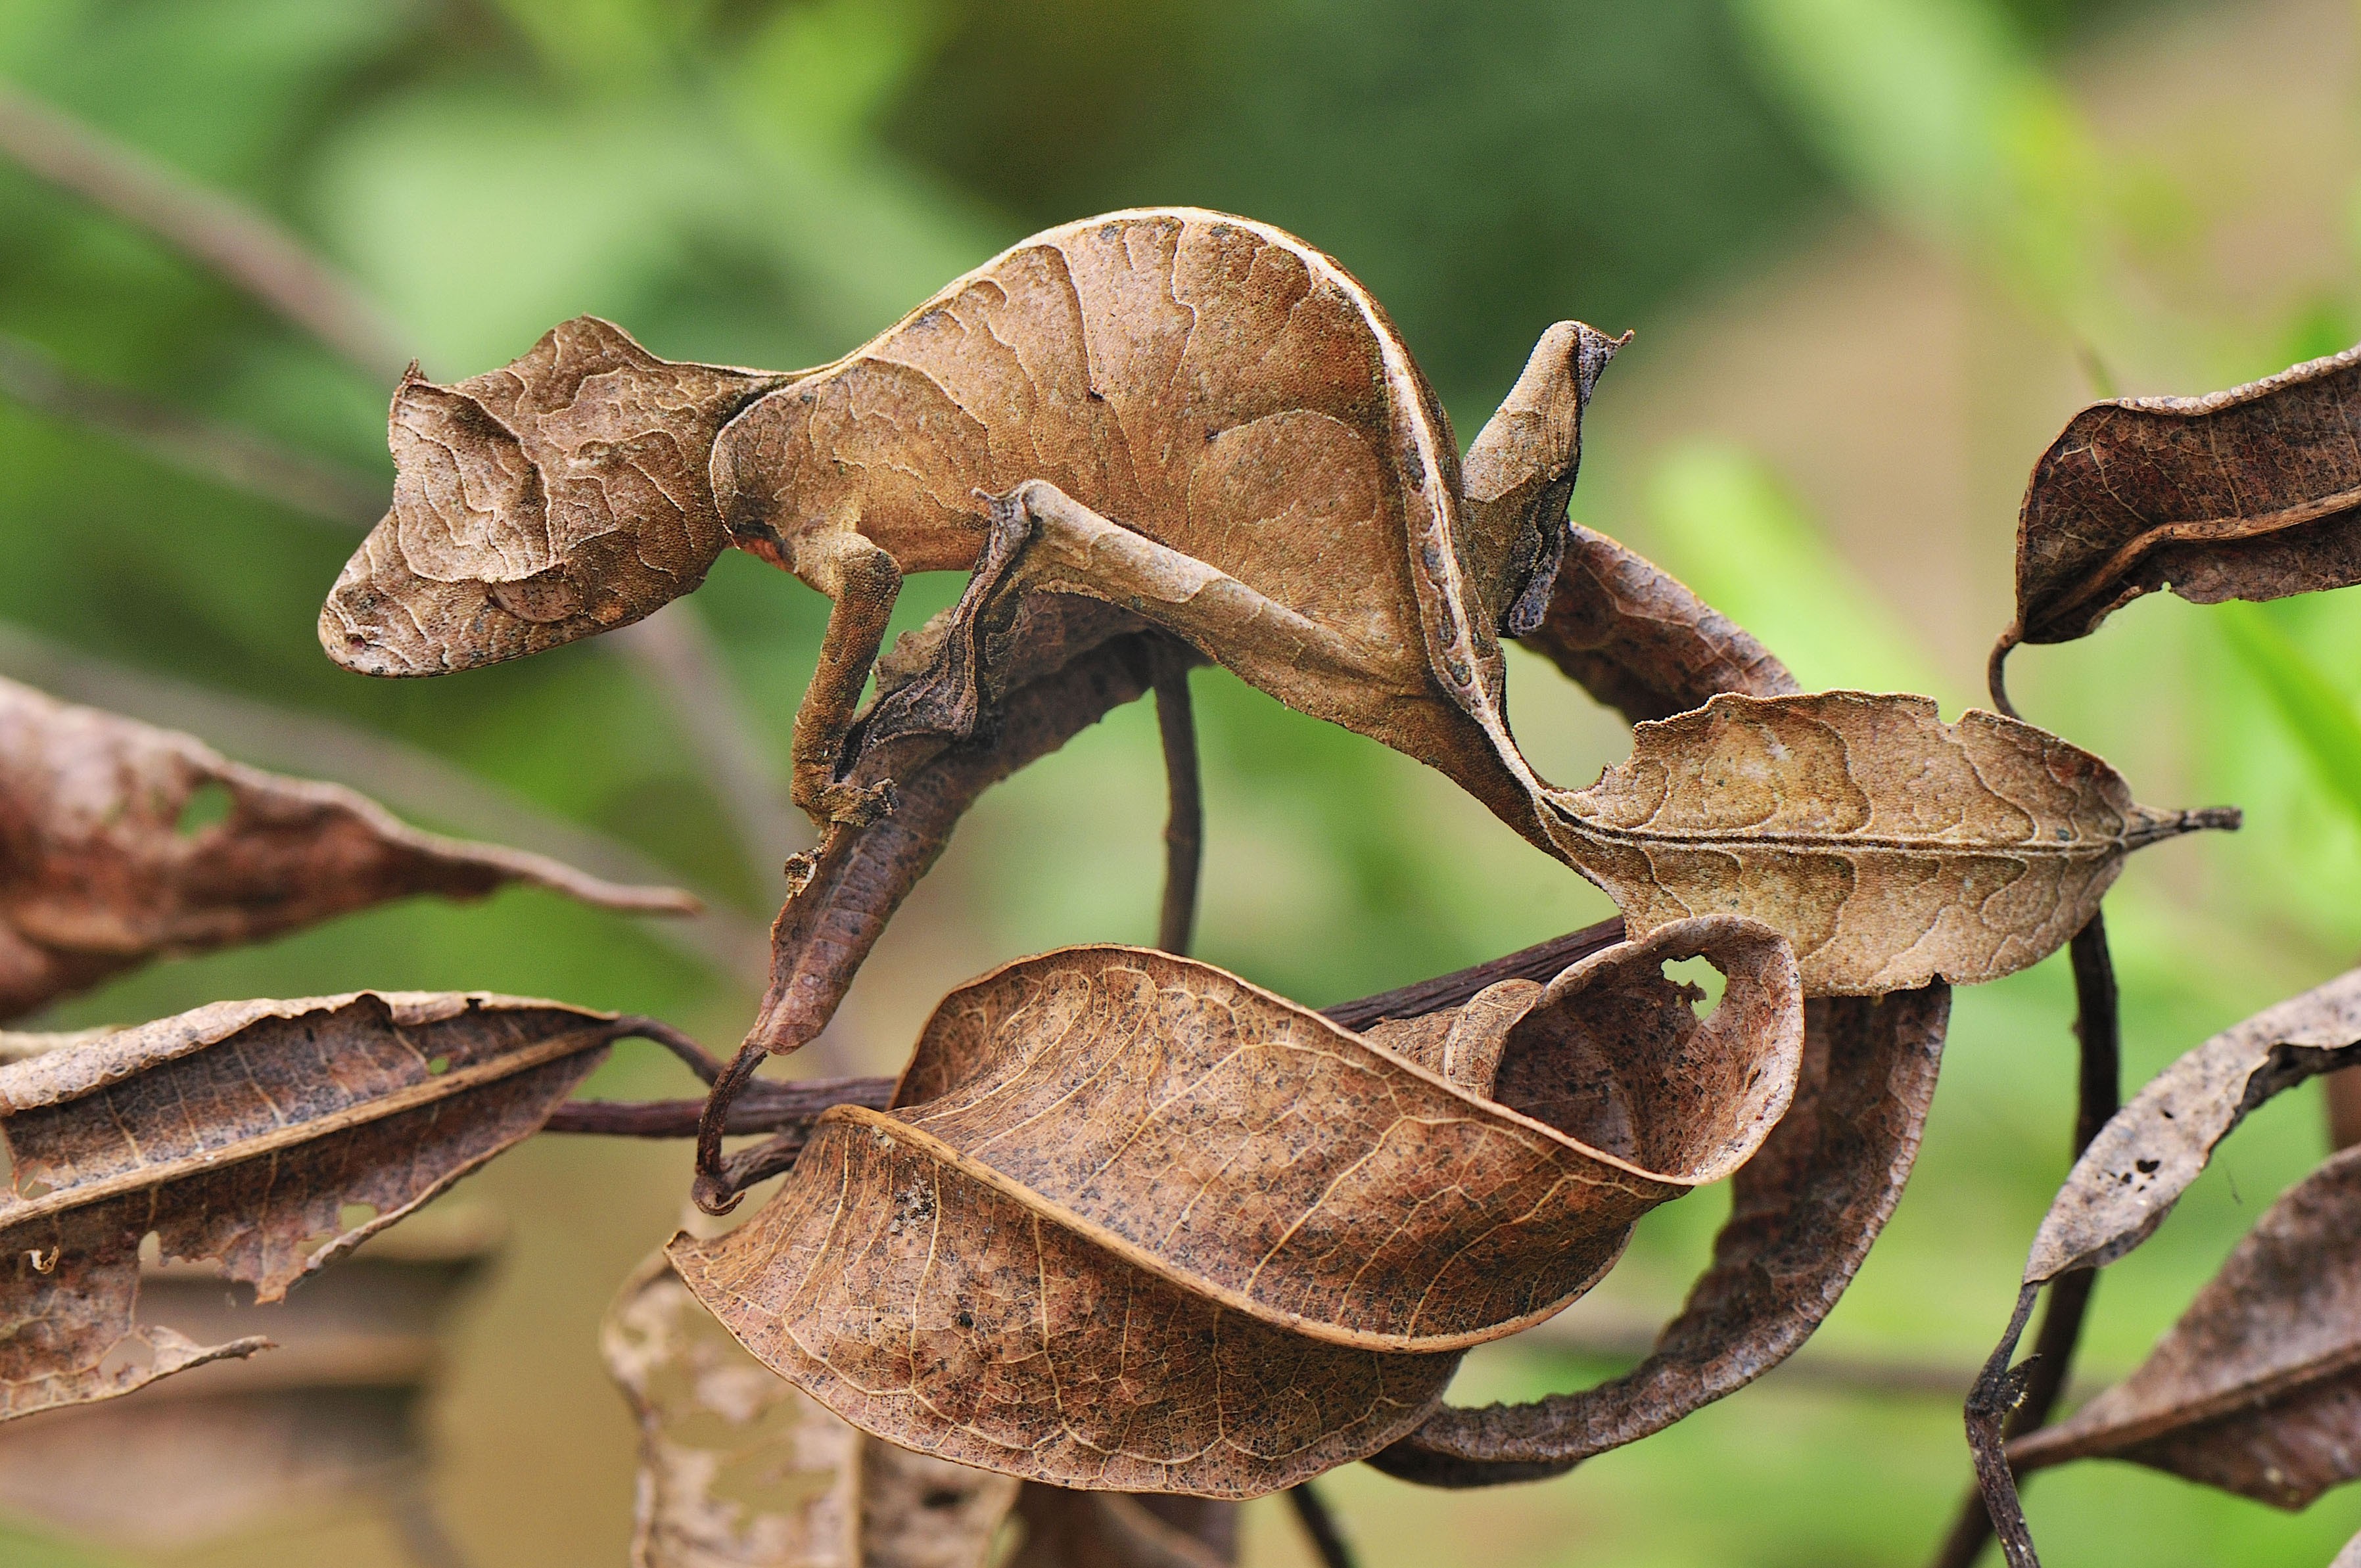 General 3592x2386 animals reptiles gecko camouflage chameleons nature closeup blurry background leaves blurred